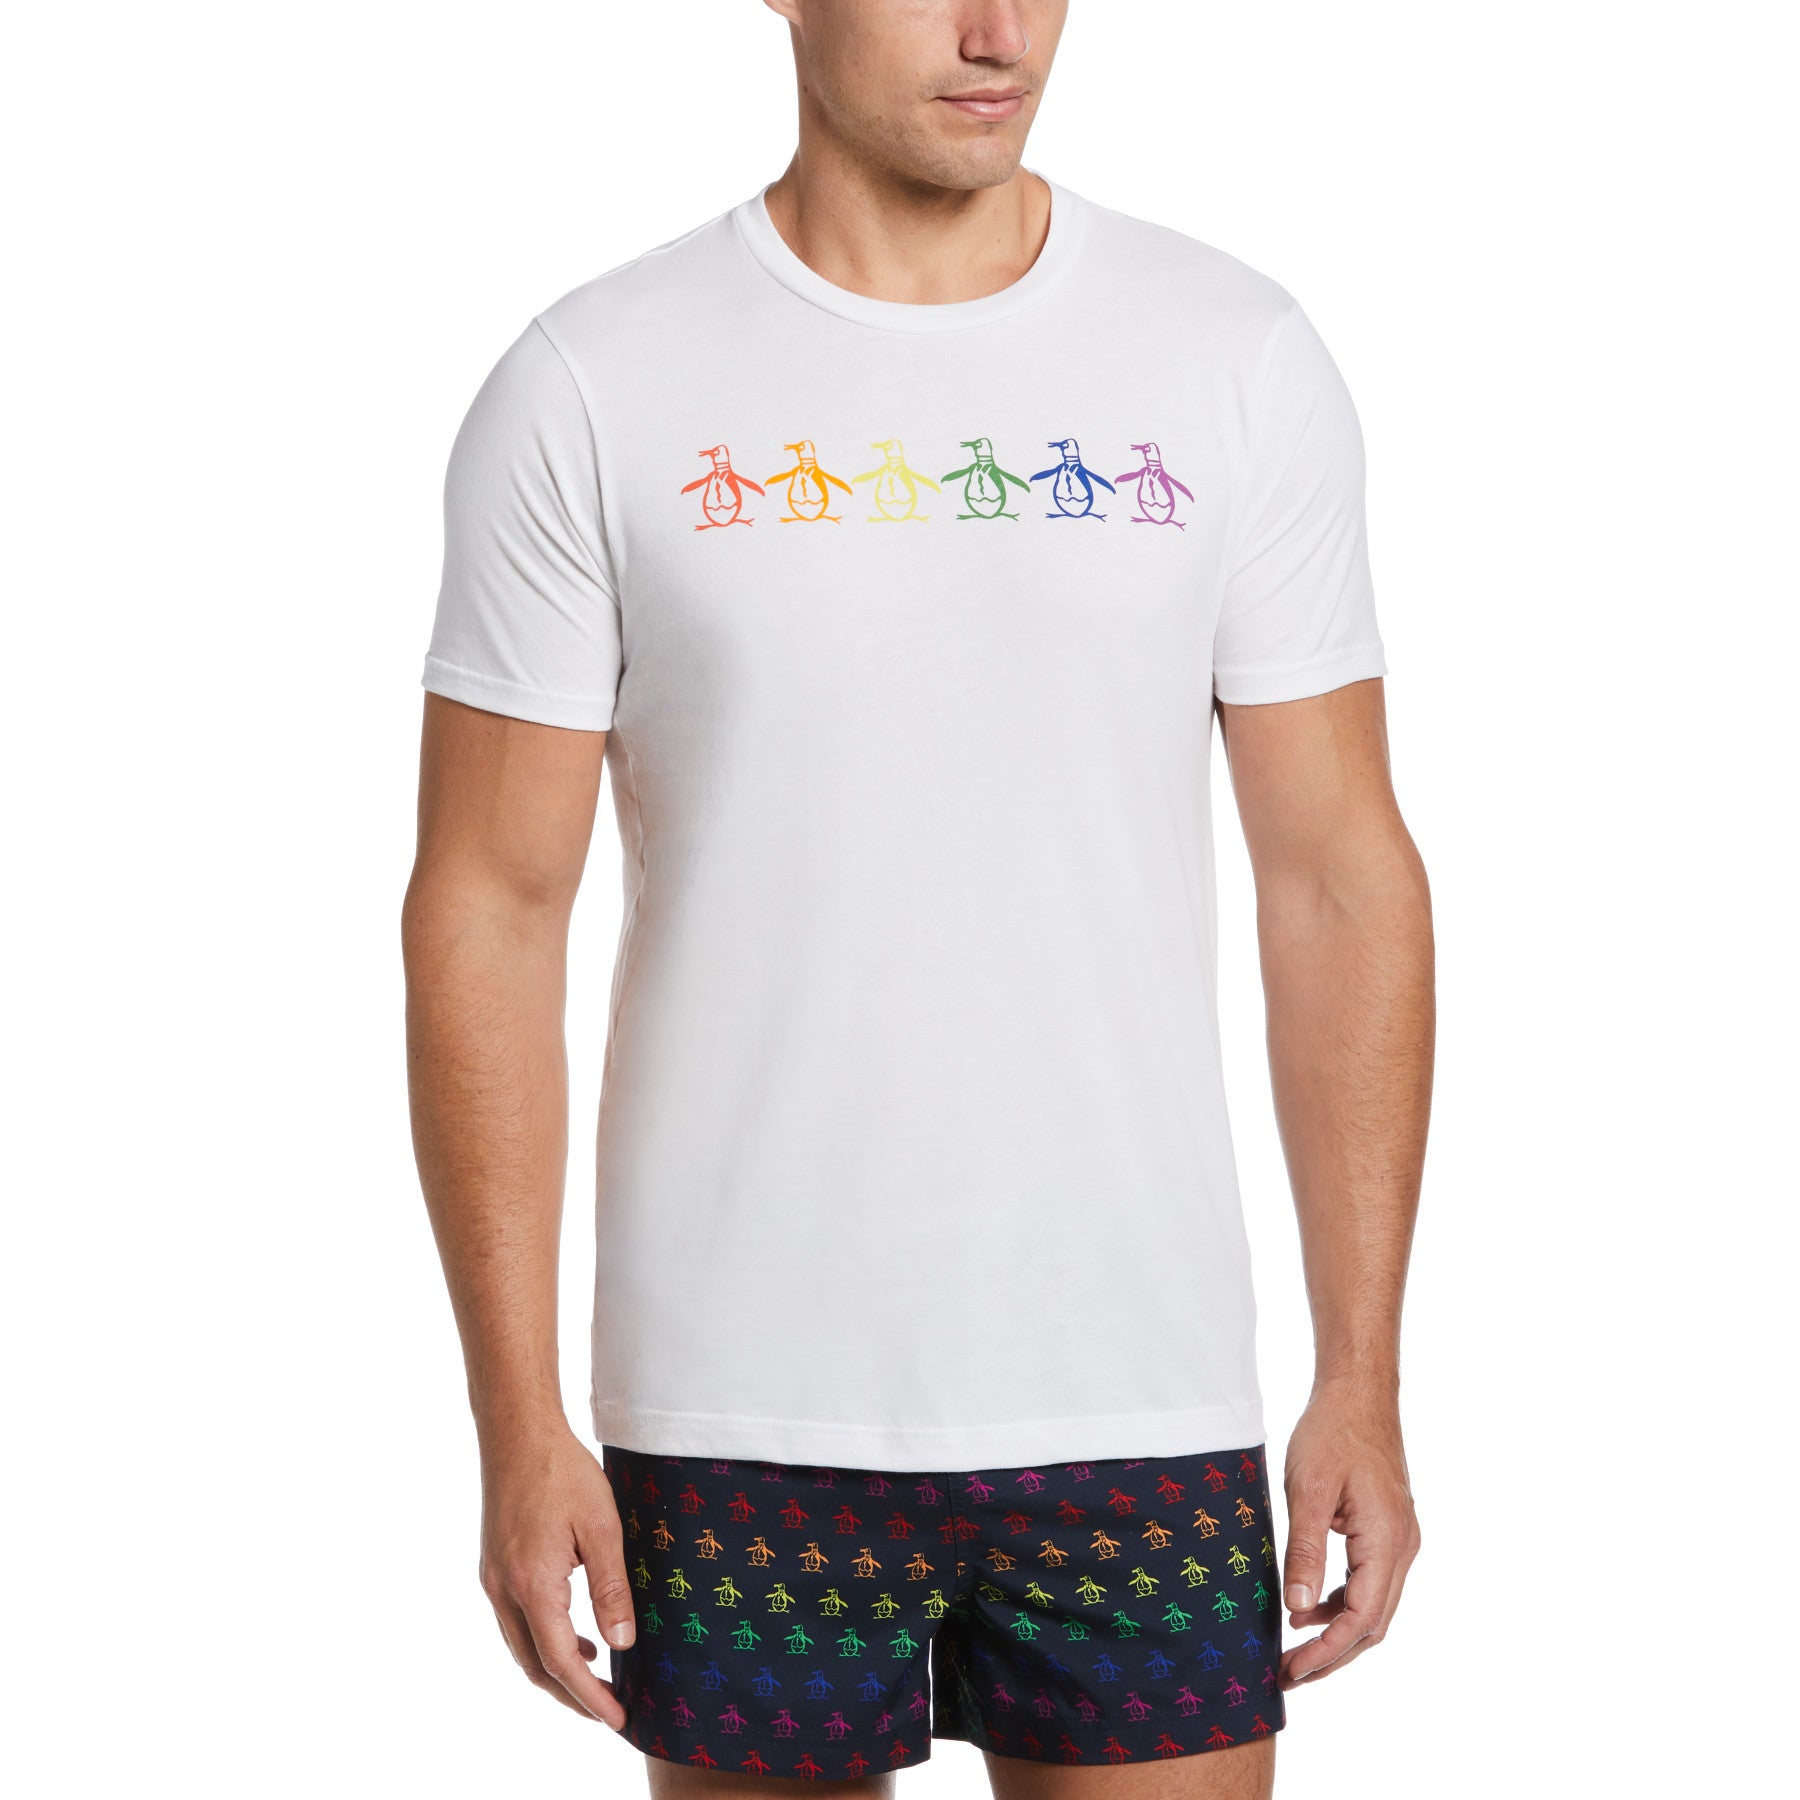 View Pride Graphic Petes TShirt In Bright White information